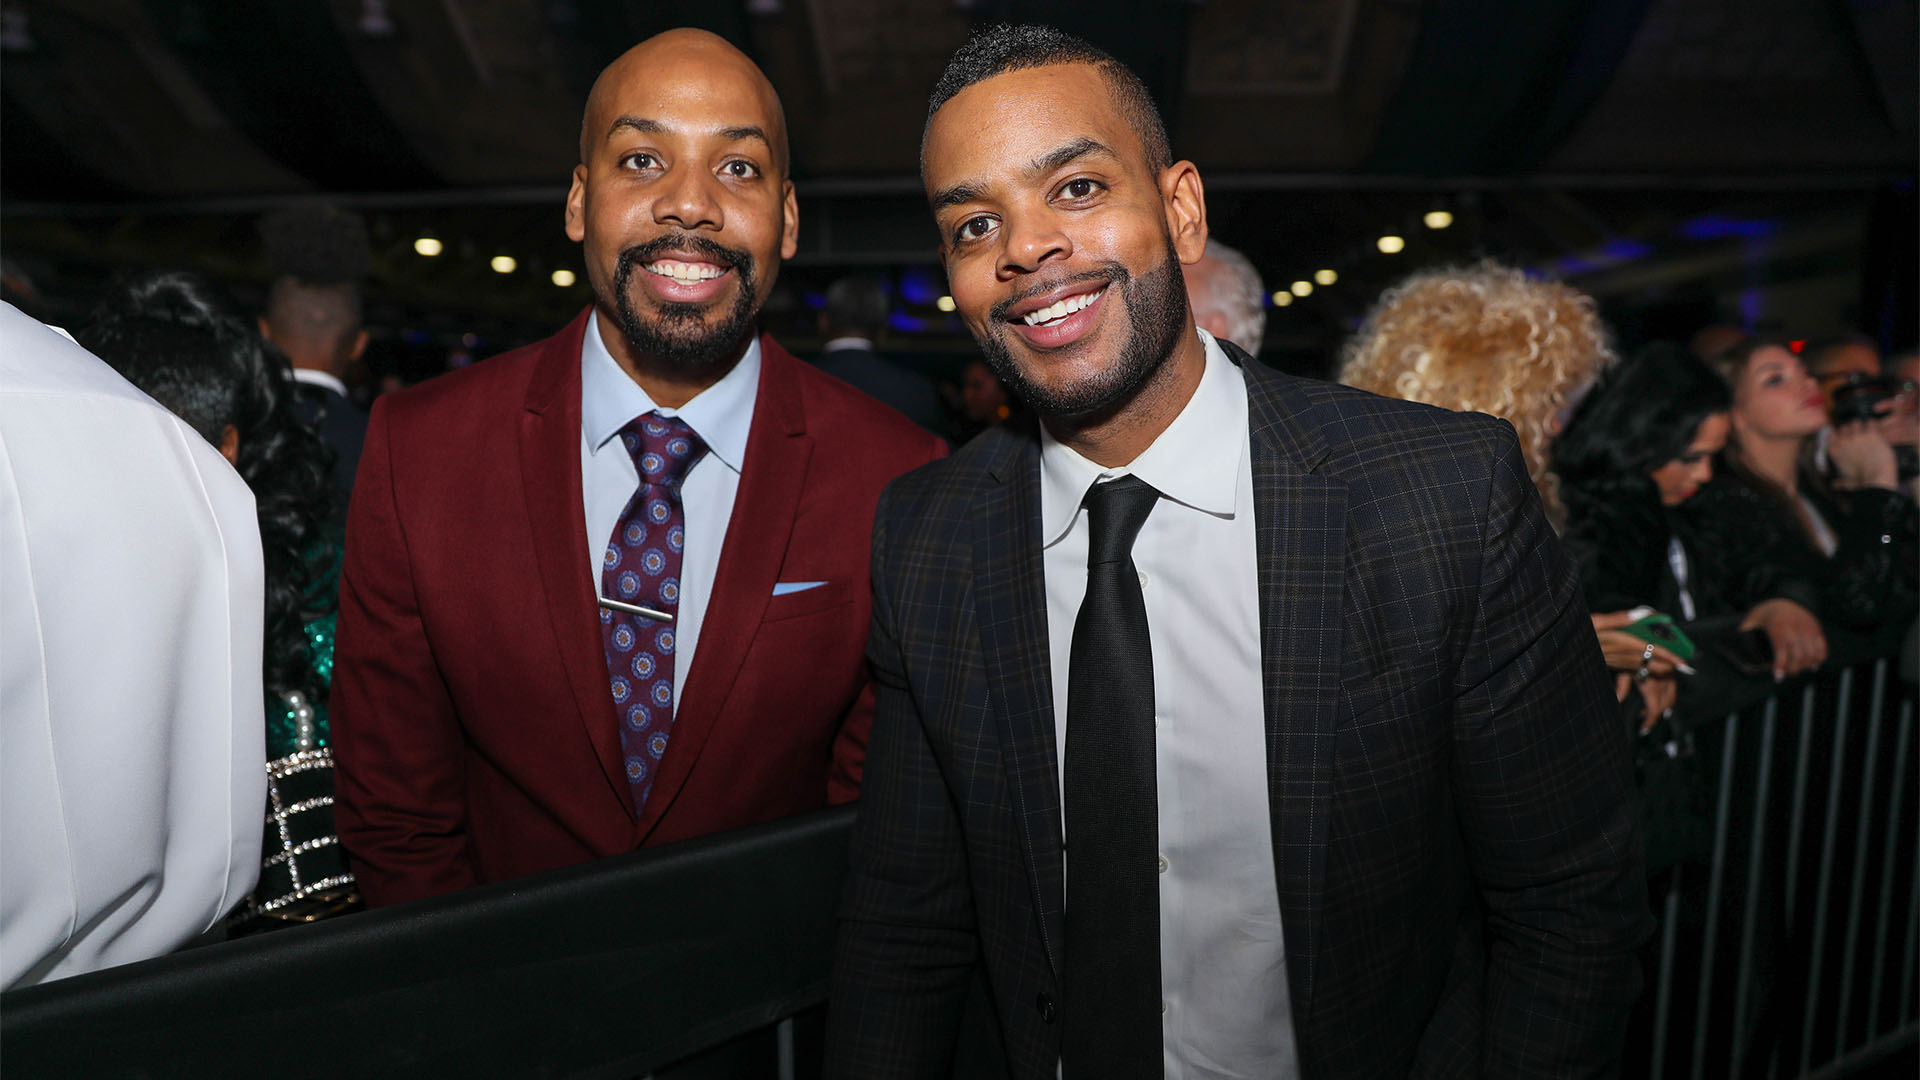 The Burns Brothers Are Set To Make History With The First African-American-Owned Private Membership Club In Africa